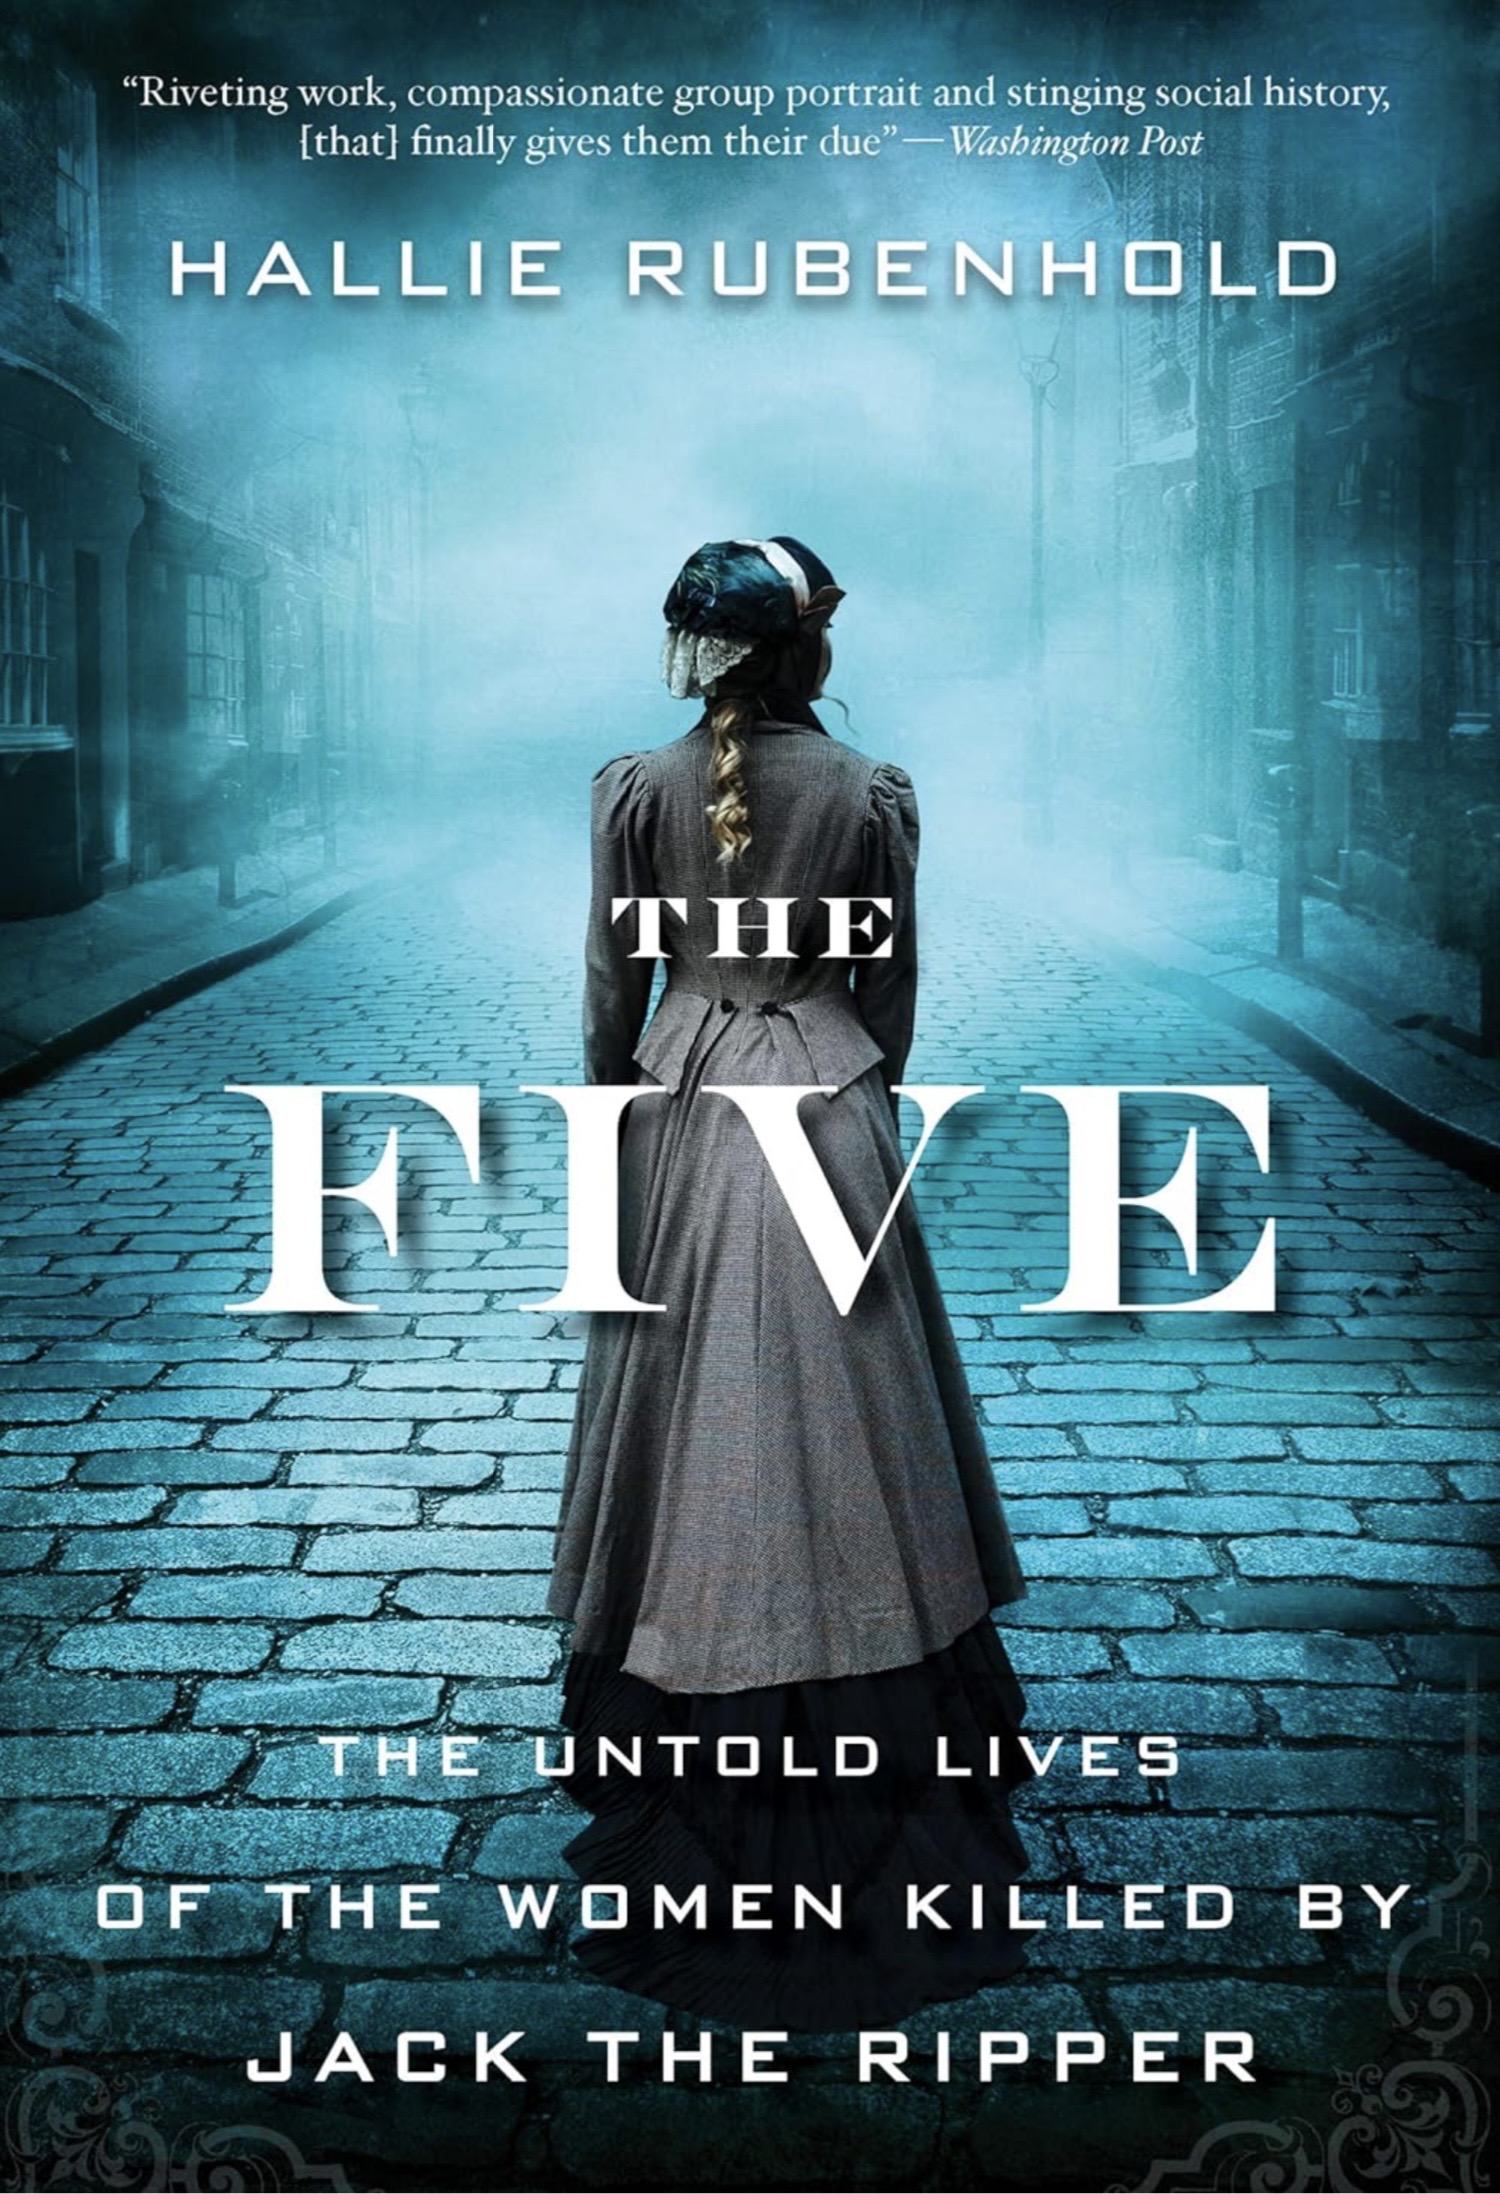 Book cover art of The Five by Hallie Rubenhold